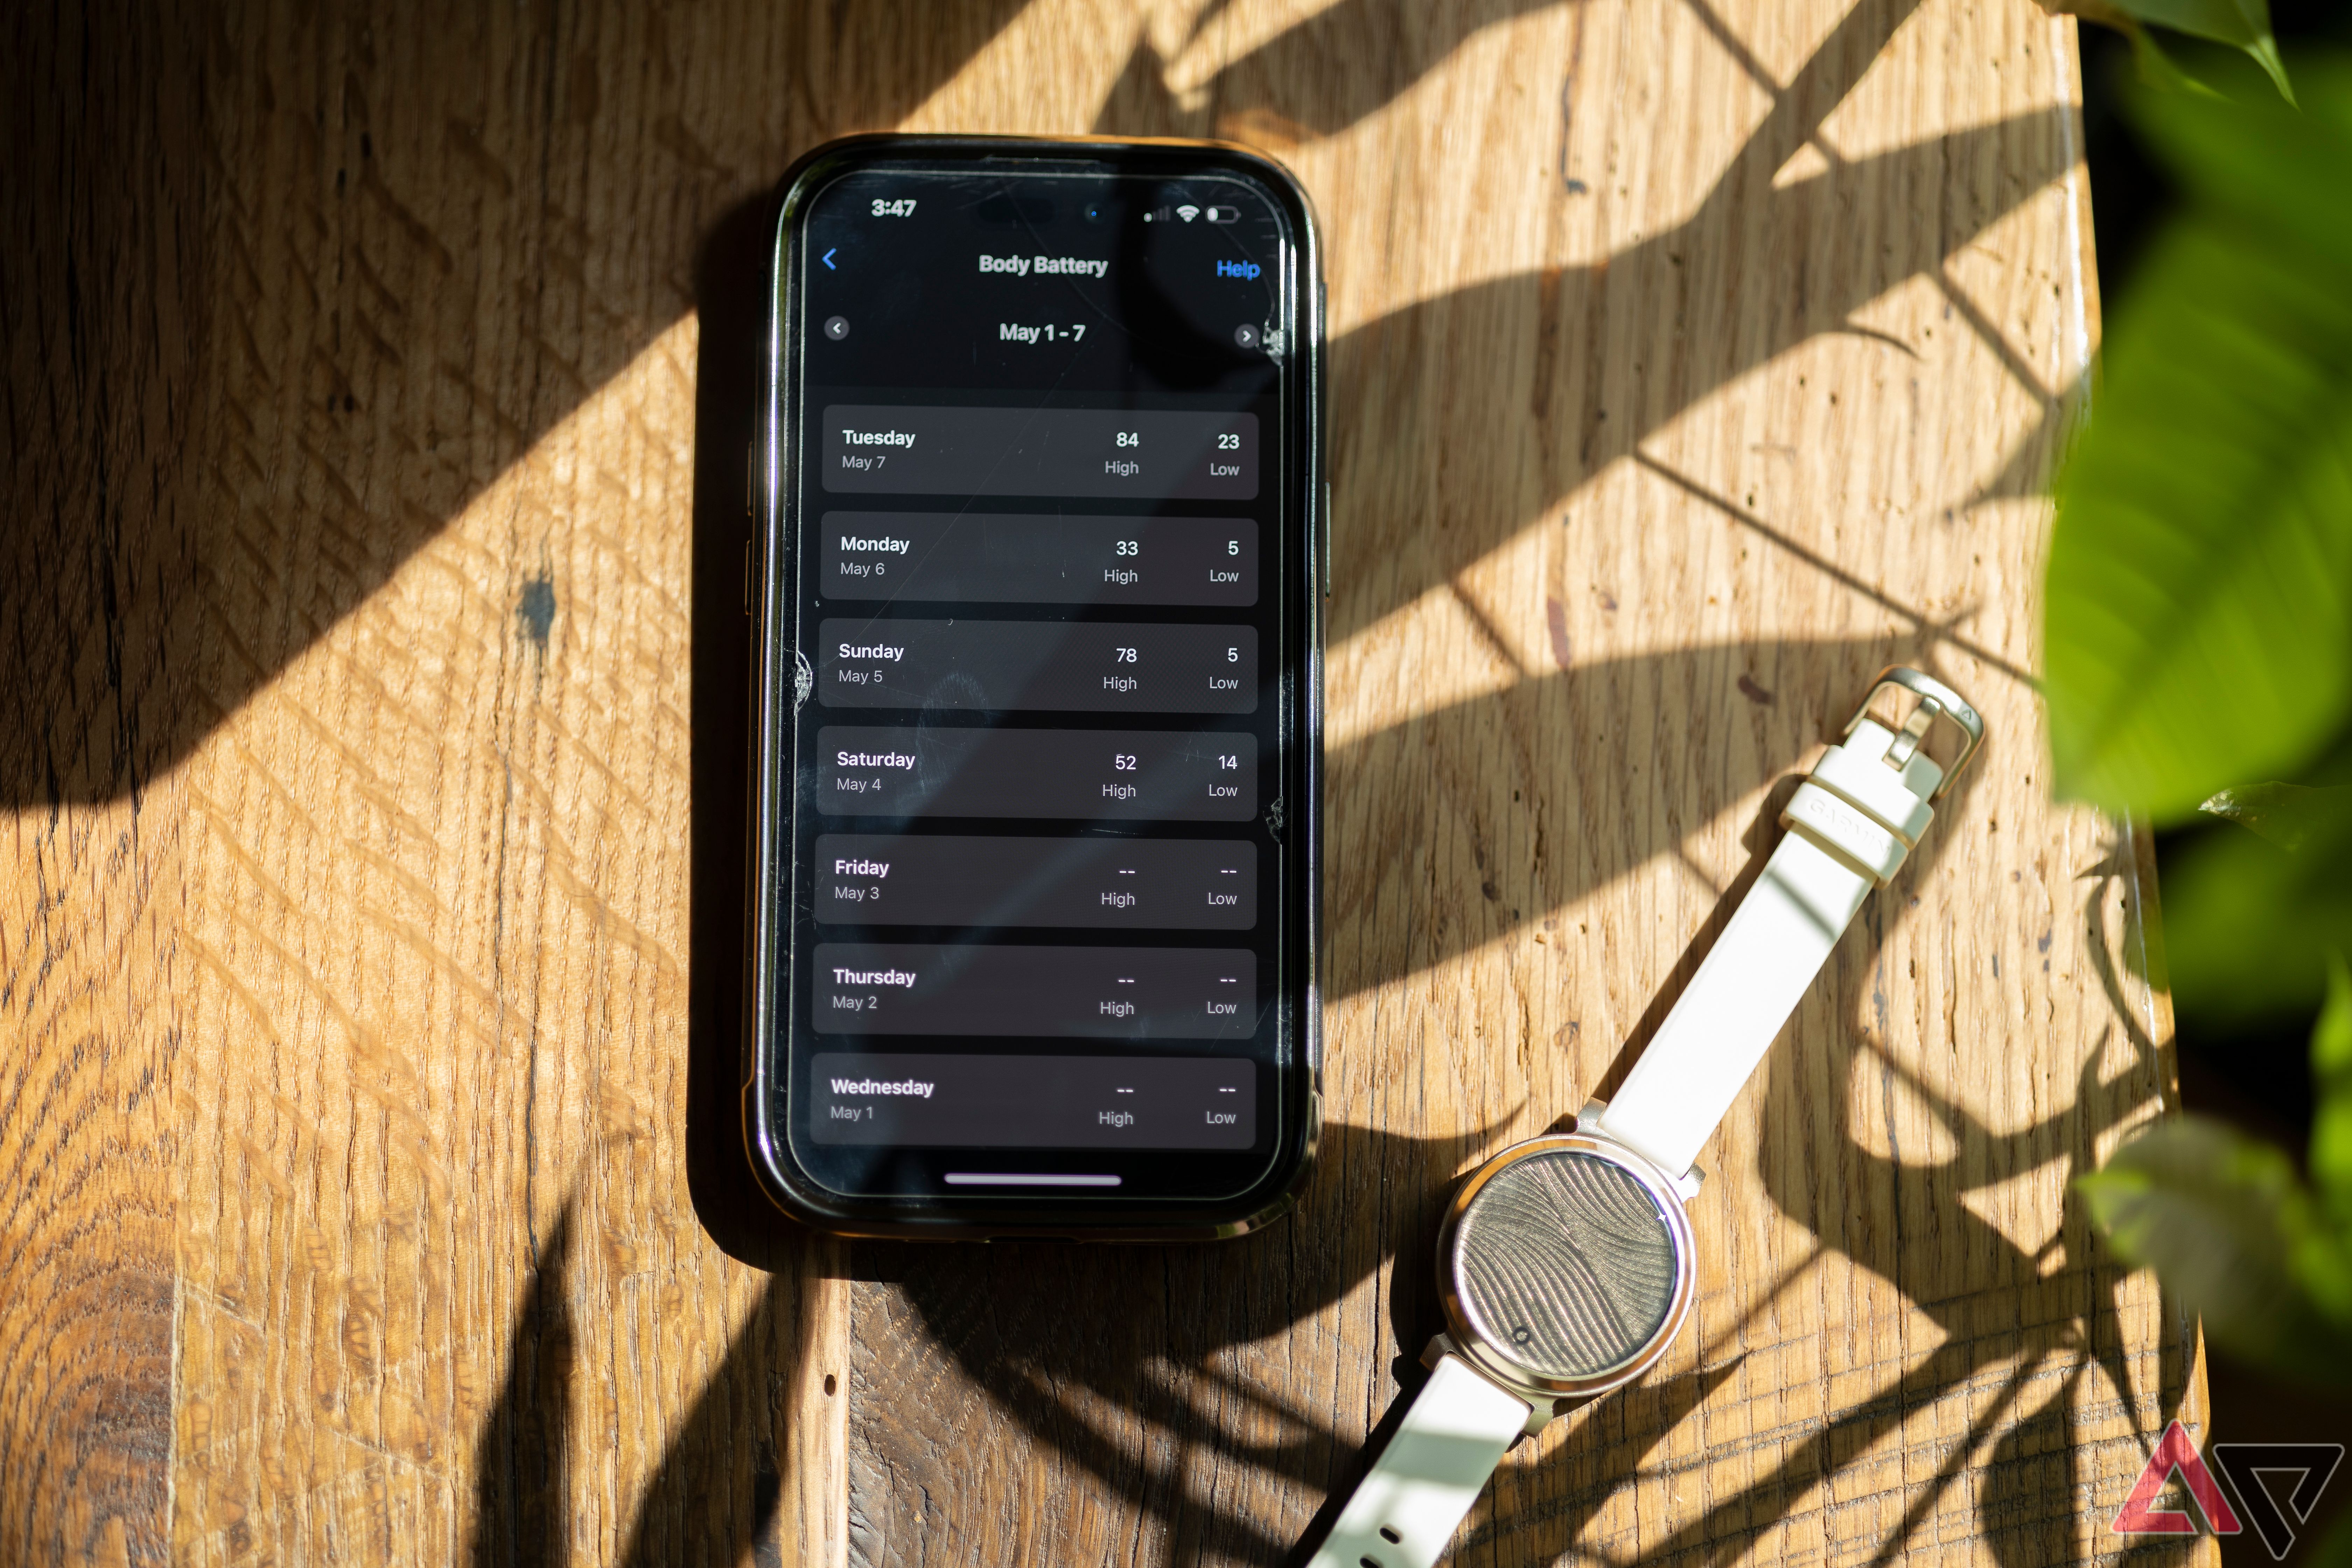 Garmin Lily 2 next to iPhone open to Body Battery stats in Garmin app